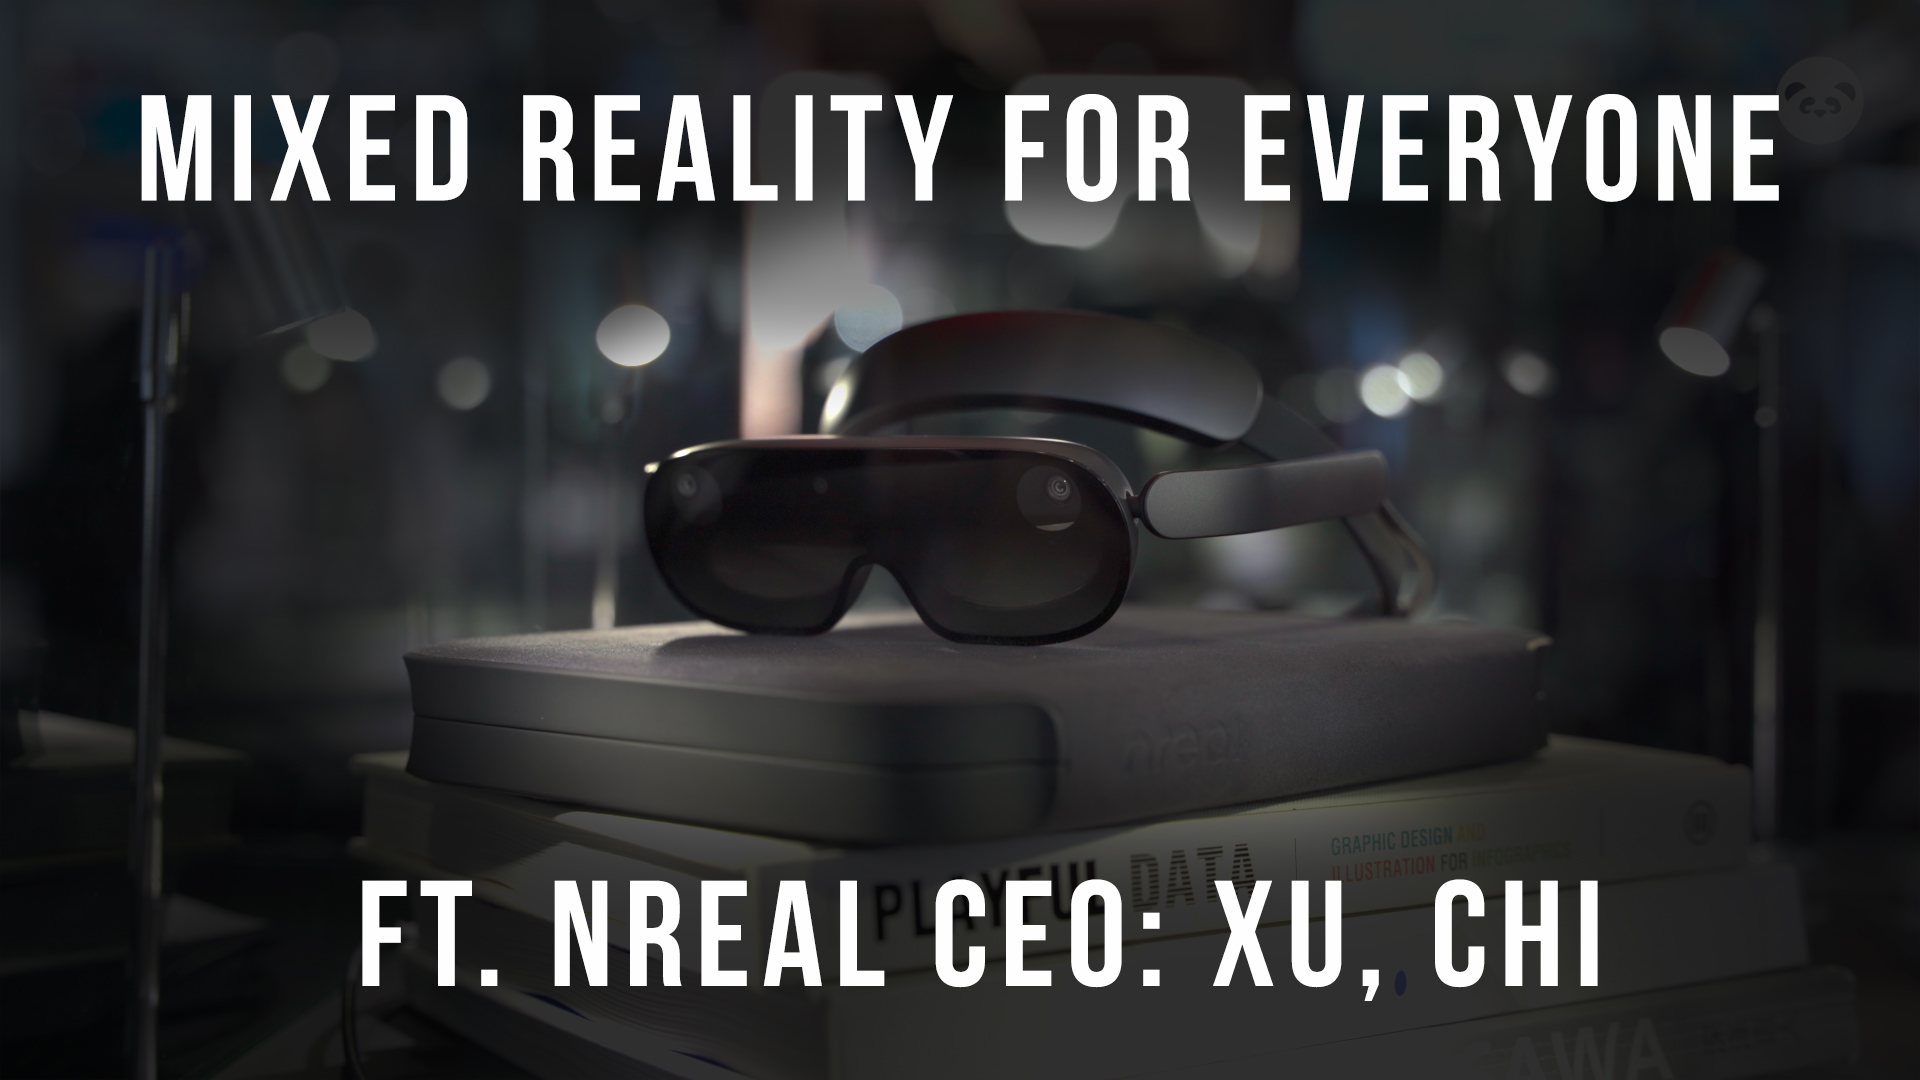 Make Mixed Reality for Everyone: Interview with Nreal CEO Xu, Chi